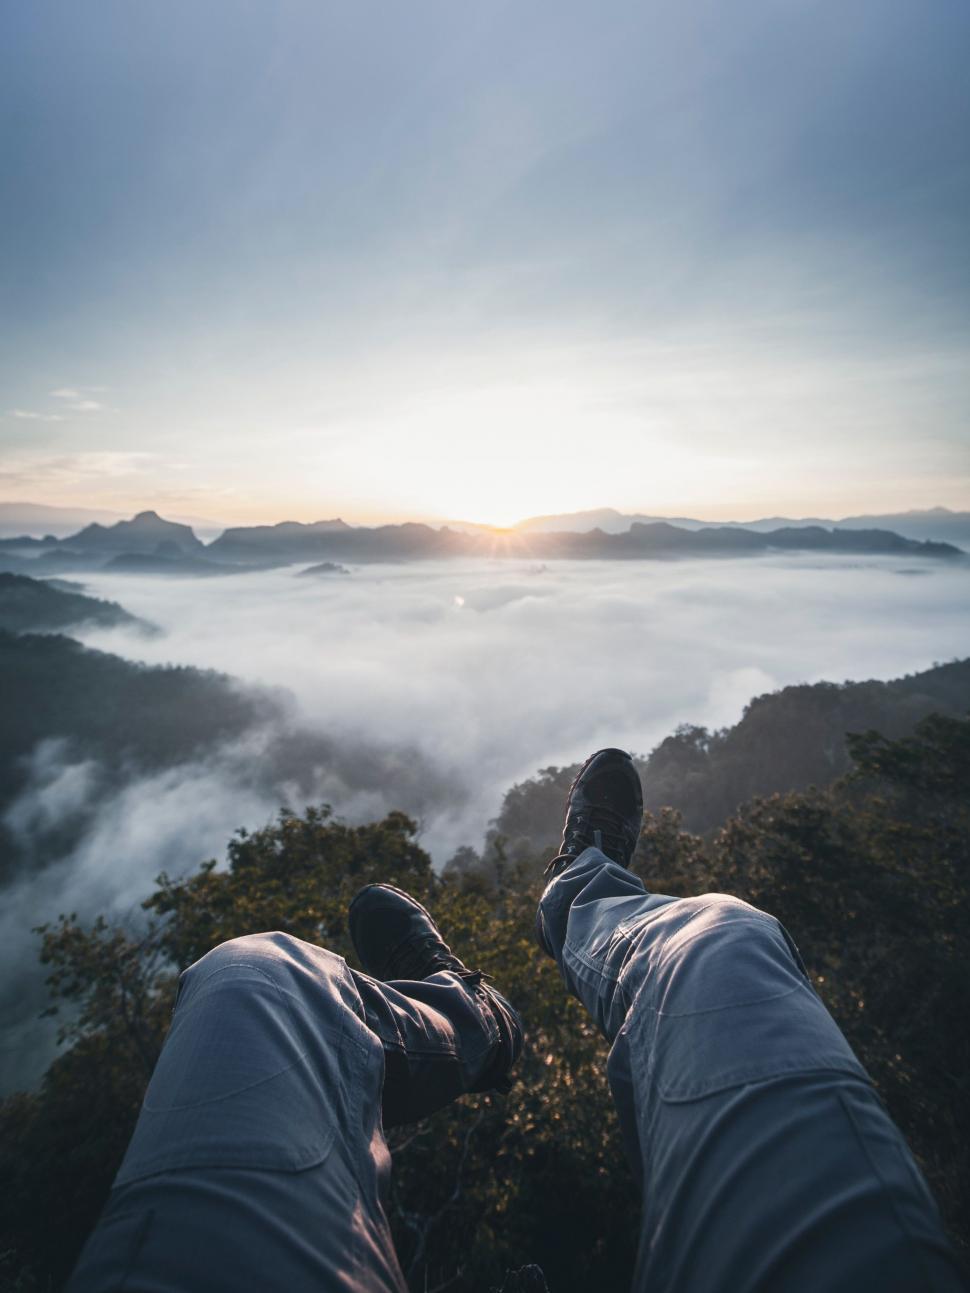 Free Image of Person Standing on Mountain Top With Feet Raised 